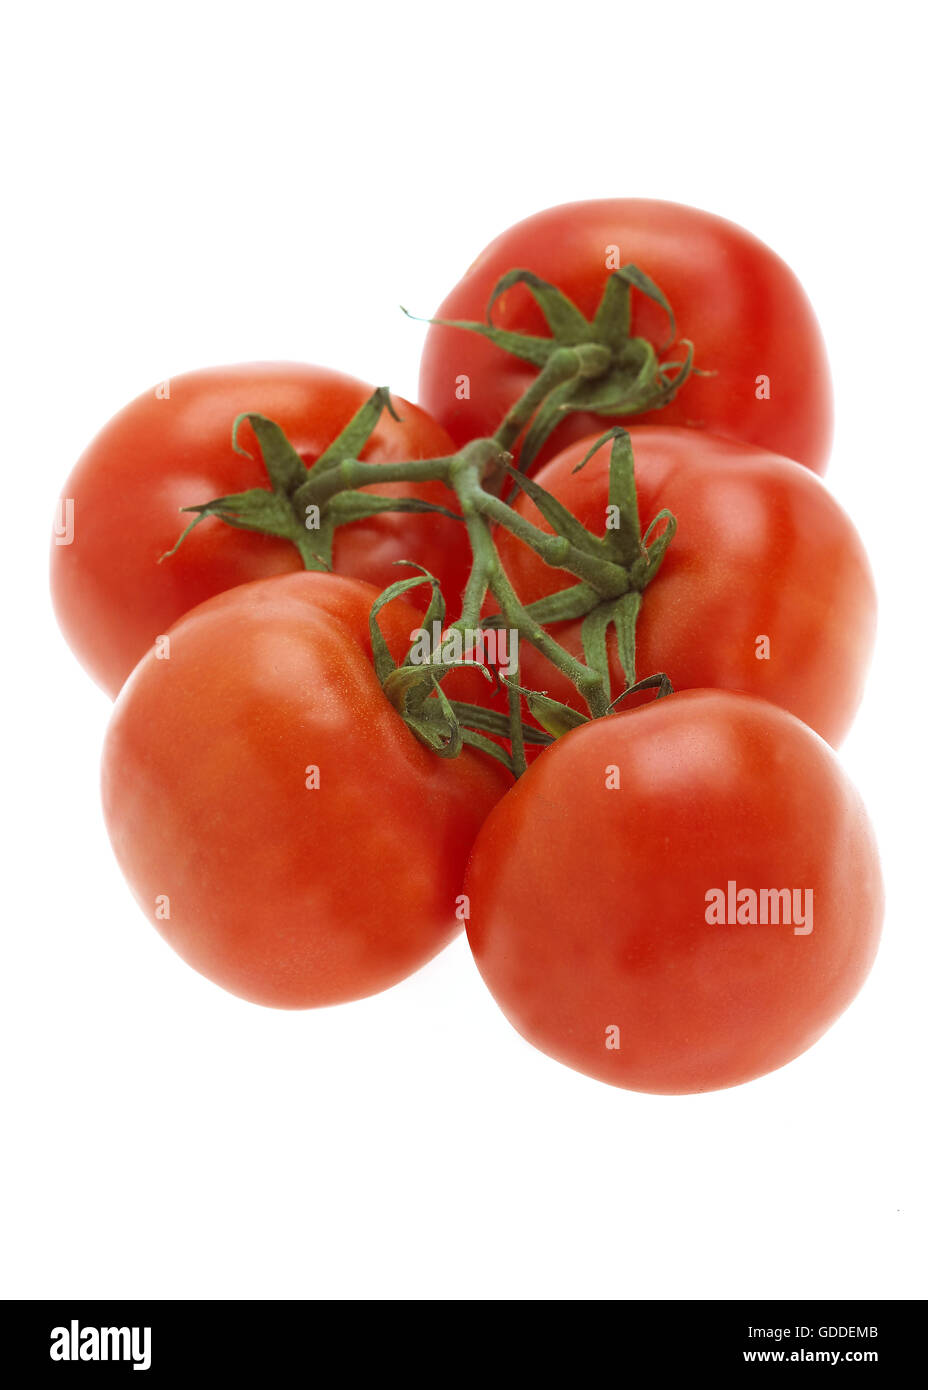 RED TOMATO CLUSTER AGAINST WHITE BACKGROUND Stock Photo